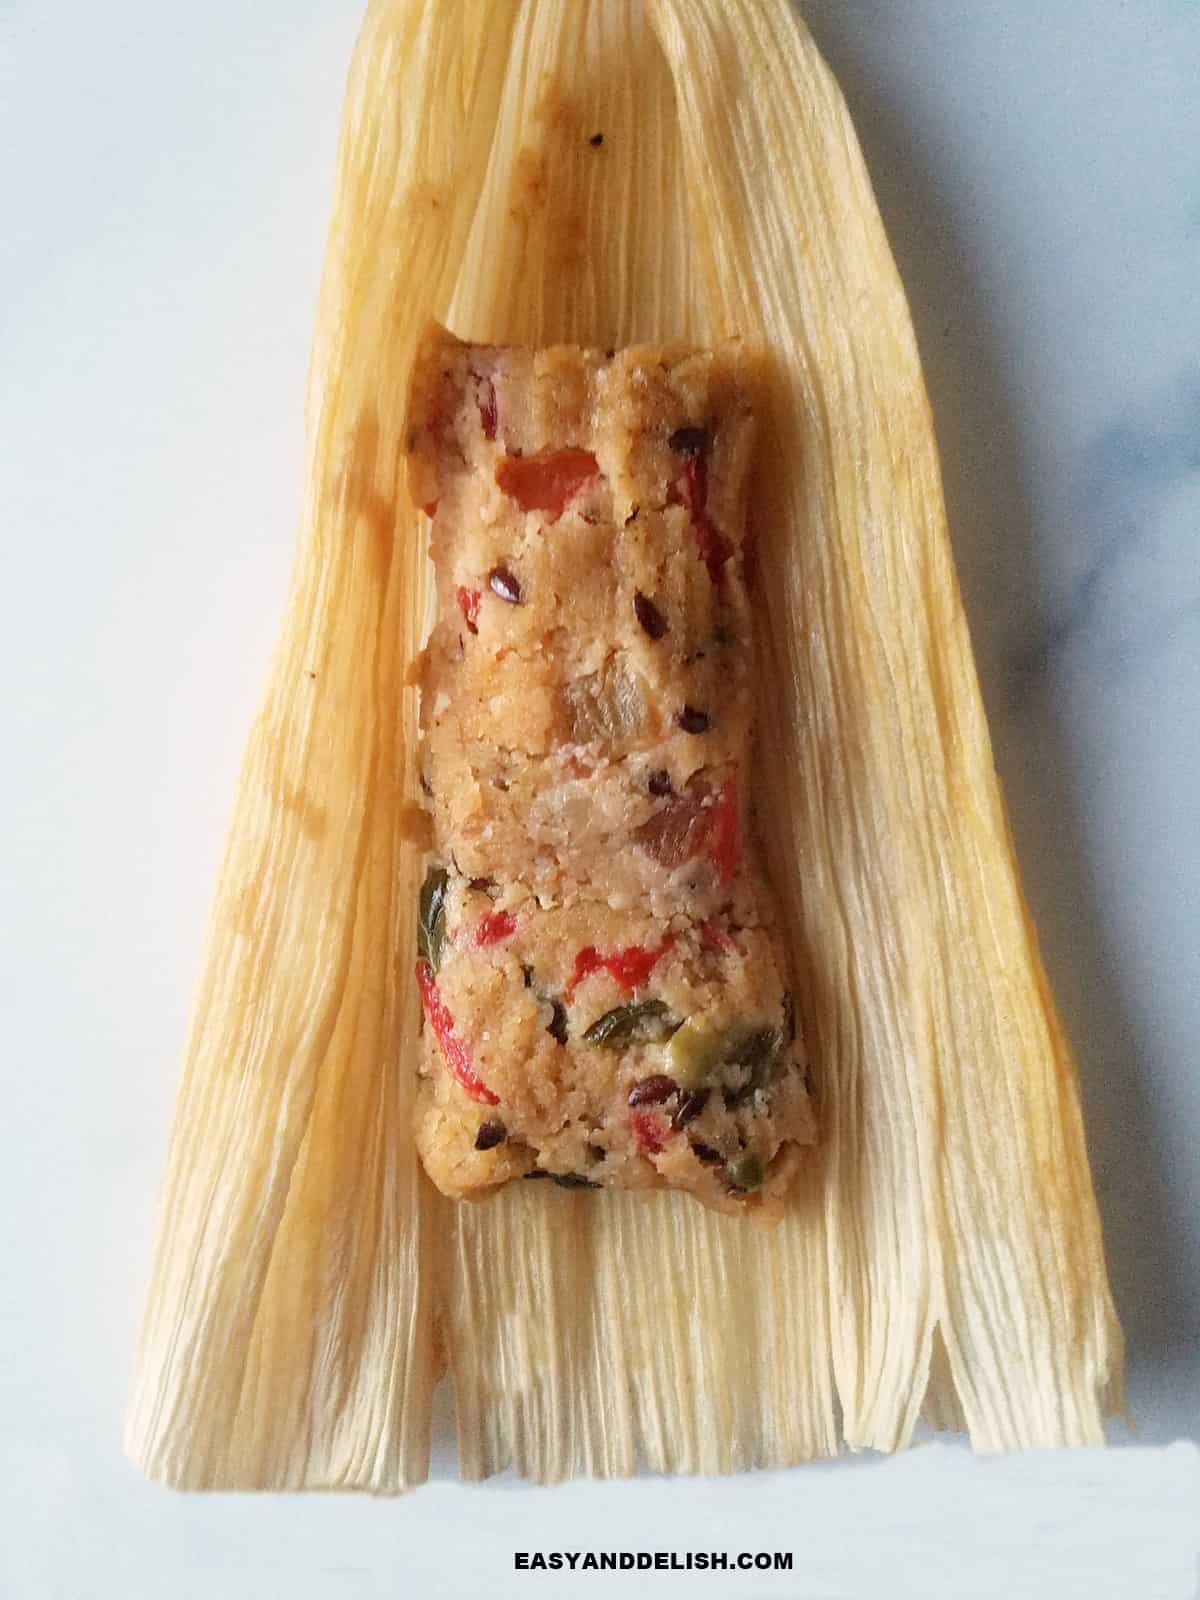 one low carb tamale unwrapped.